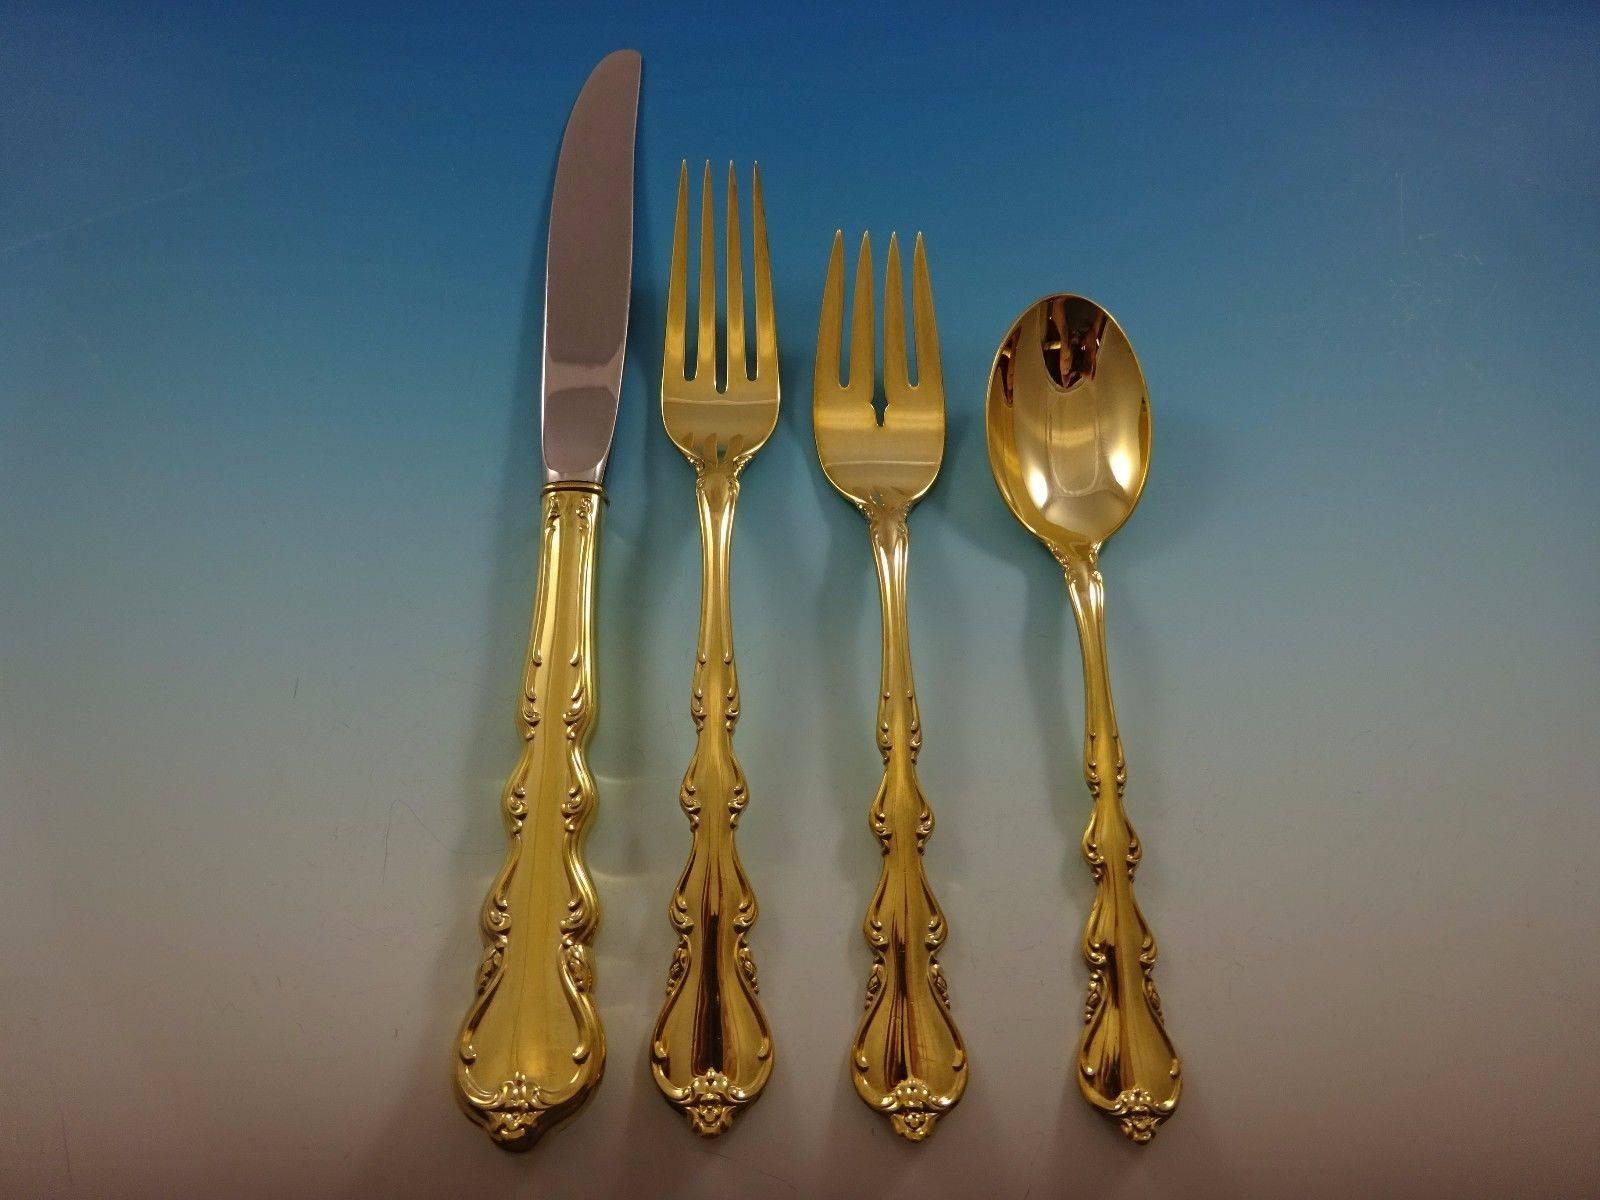 Beautiful angelique gold by International Sterling Silver flatware set 48 pieces. Gold flatware is on trend and makes a bold statement on your table. 

This set is vermeil (completely gold-washed) and includes:
 
12 knives, 9 1/4